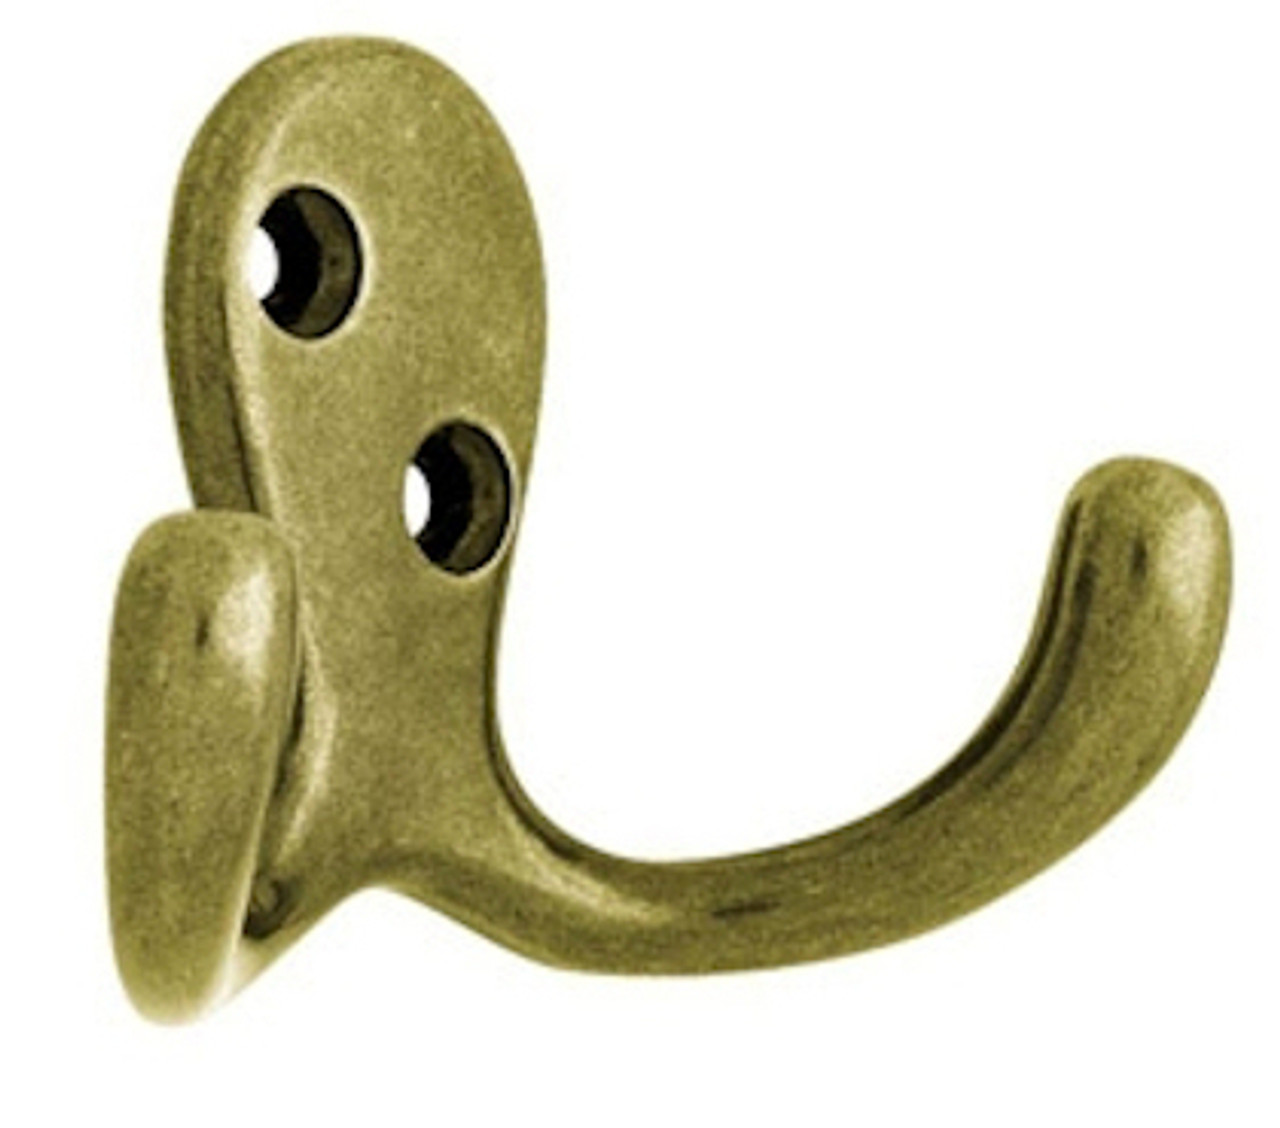 https://cdn11.bigcommerce.com/s-mul8093wwg/images/stencil/1280x1280/products/14989/34297/set-of-two-double-robe-hooks-antique-brass-1__15017.1660076269.jpg?c=1